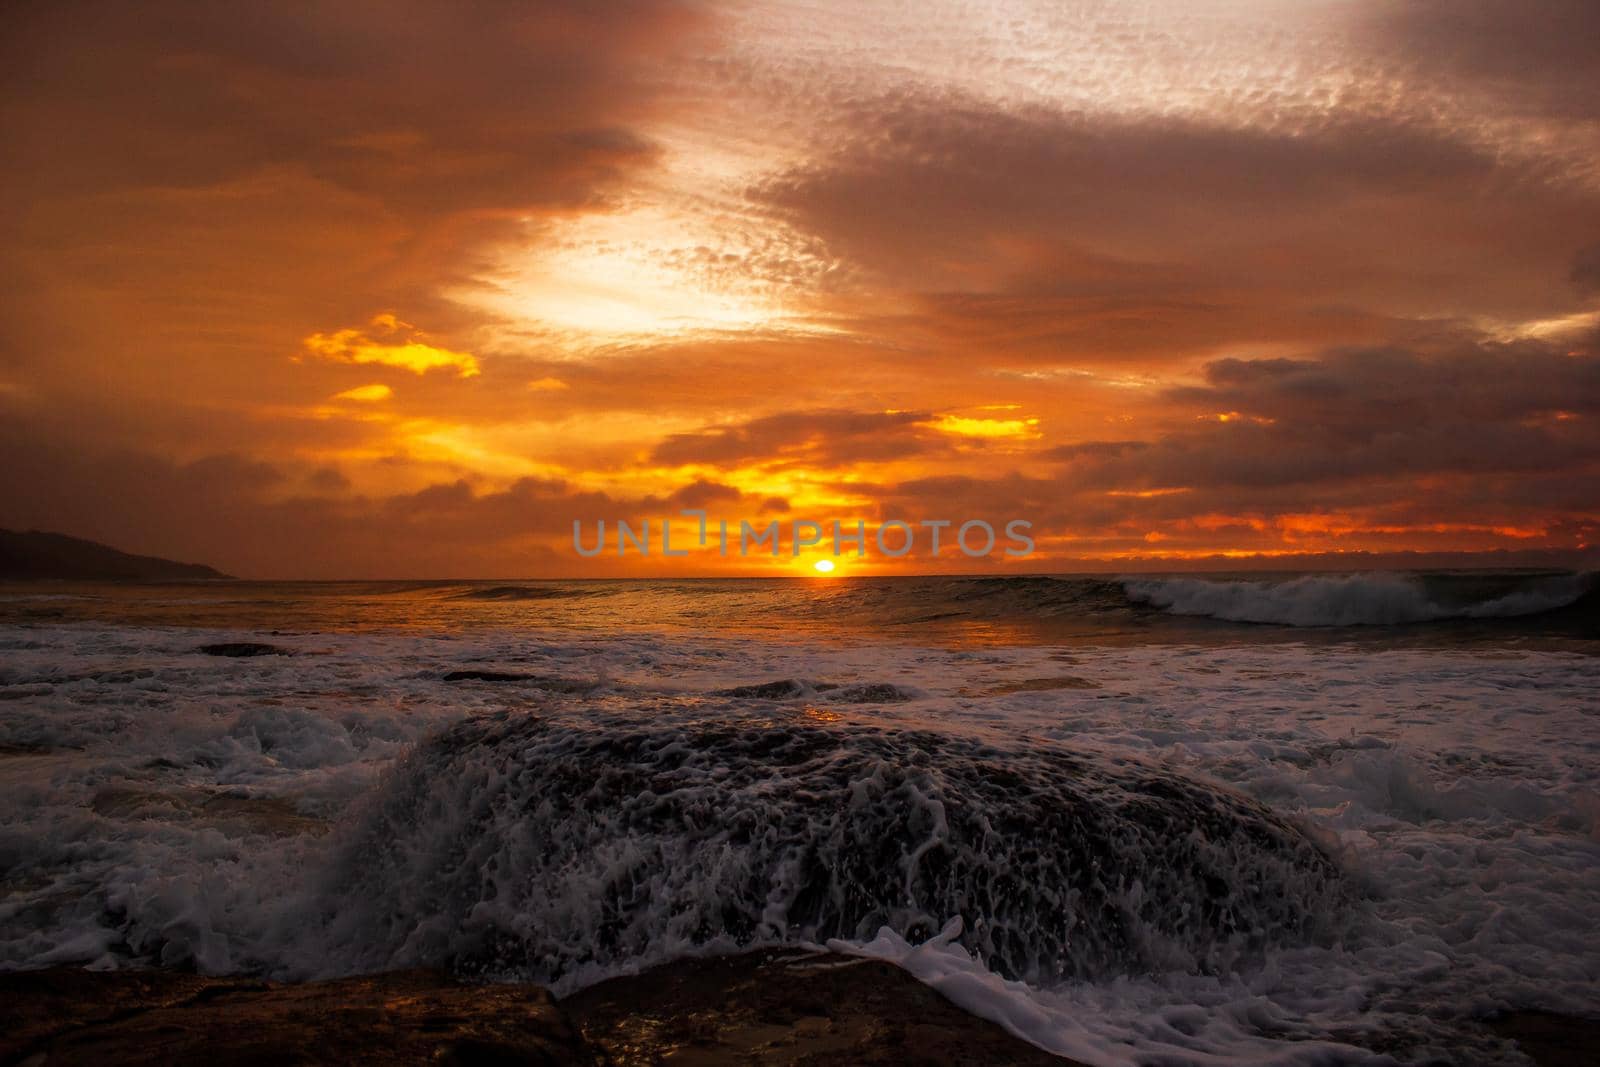 waves crushing a rock during sunrise. Sea sunrise at the great Ocean Road, Victoria, Australia by bettercallcurry